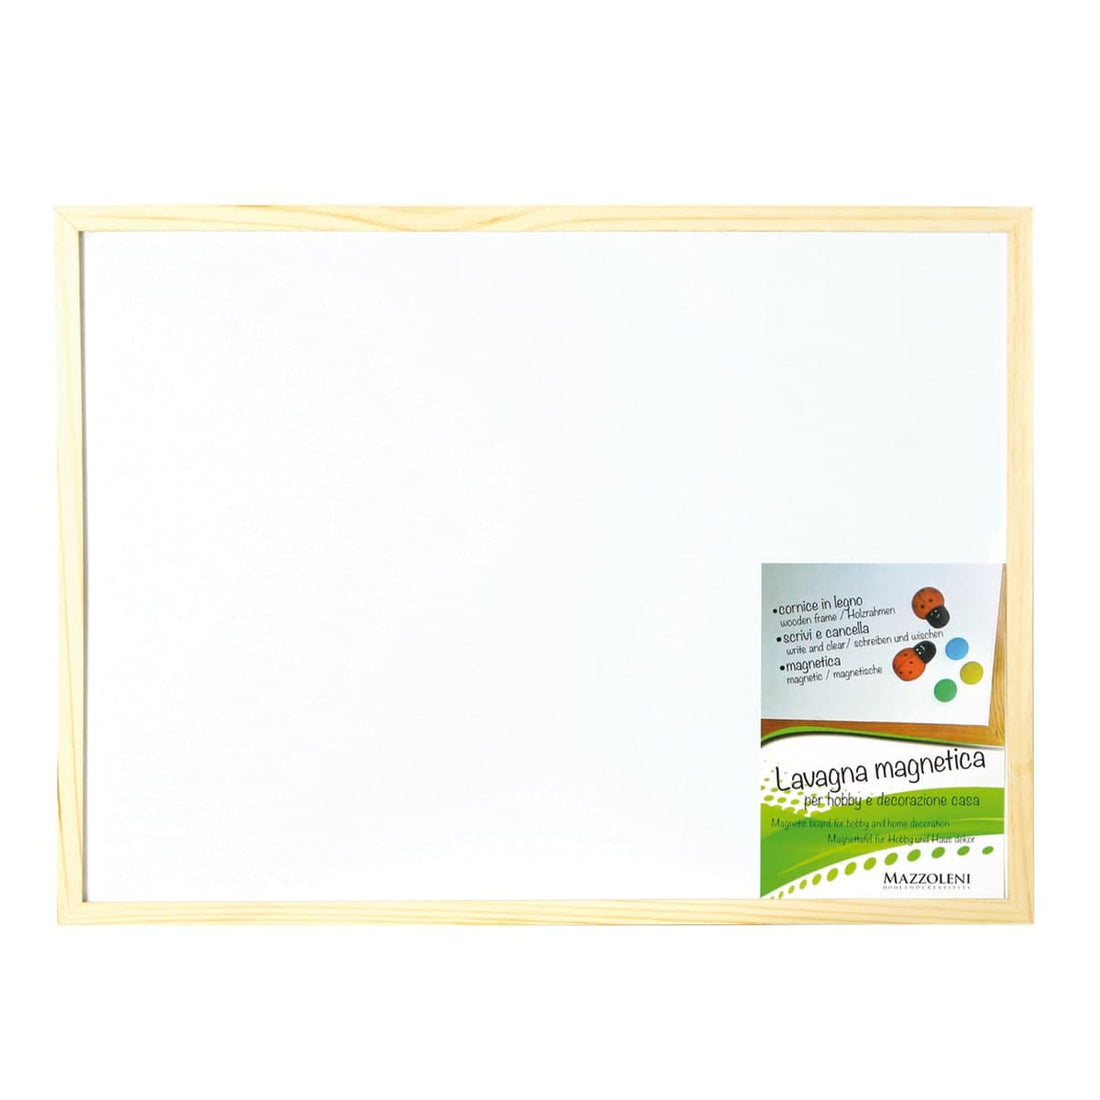 45X60CM PVC MAGNETIC BOARD WITH WOODEN FRAME - best price from Maltashopper.com BR480770032